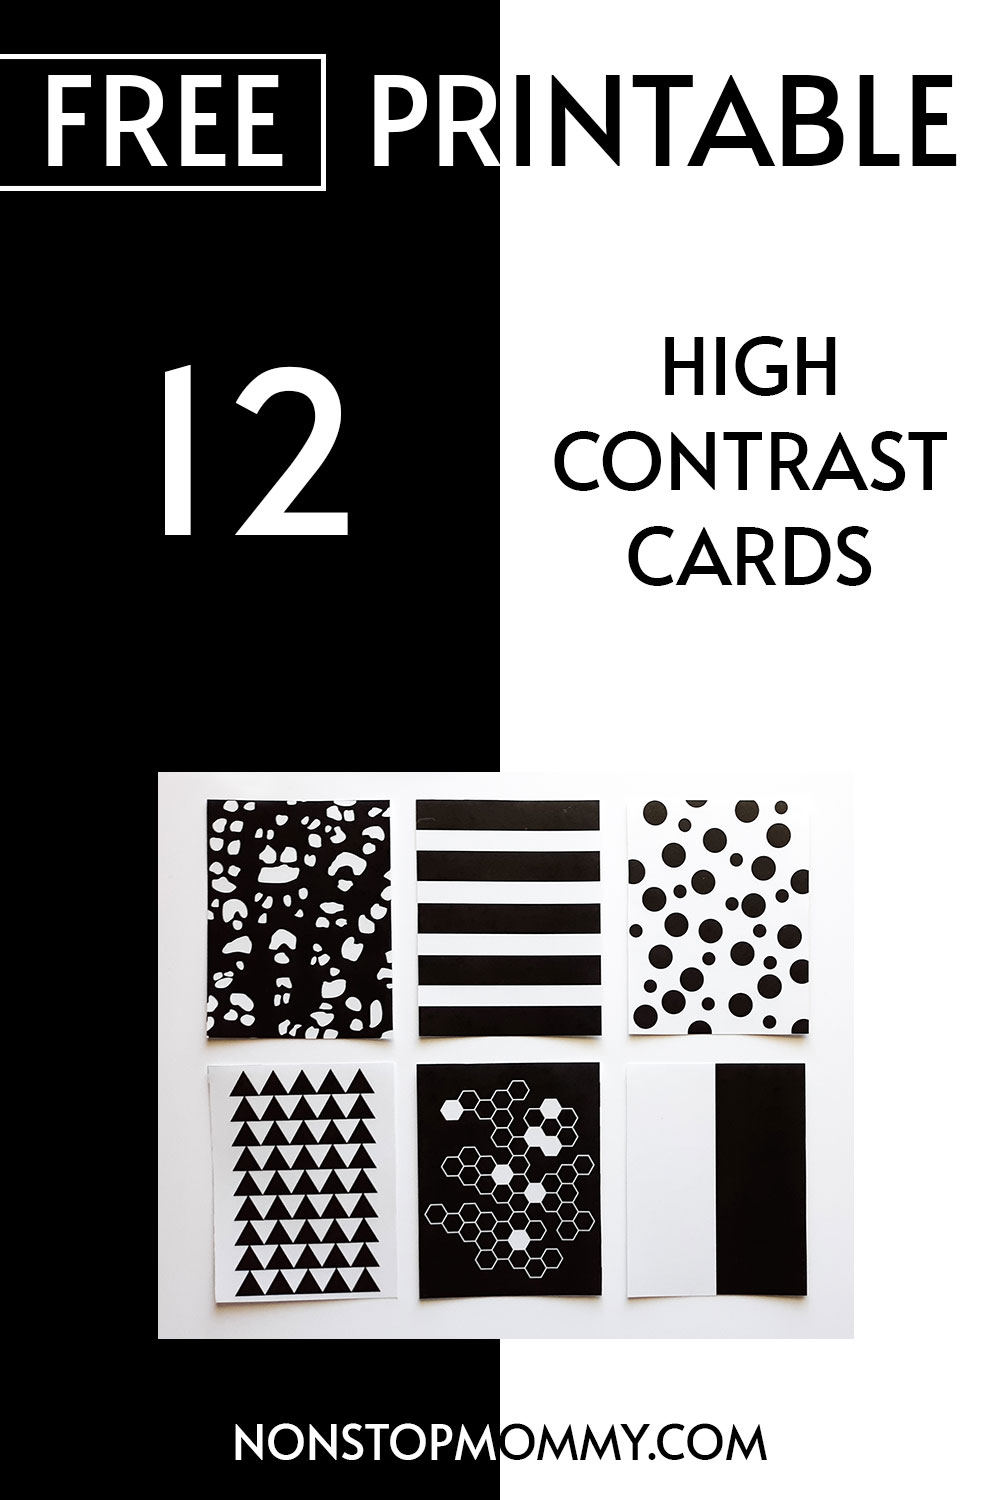 12-free-printable-high-contrast-cards-for-your-baby-nonstop-mommy